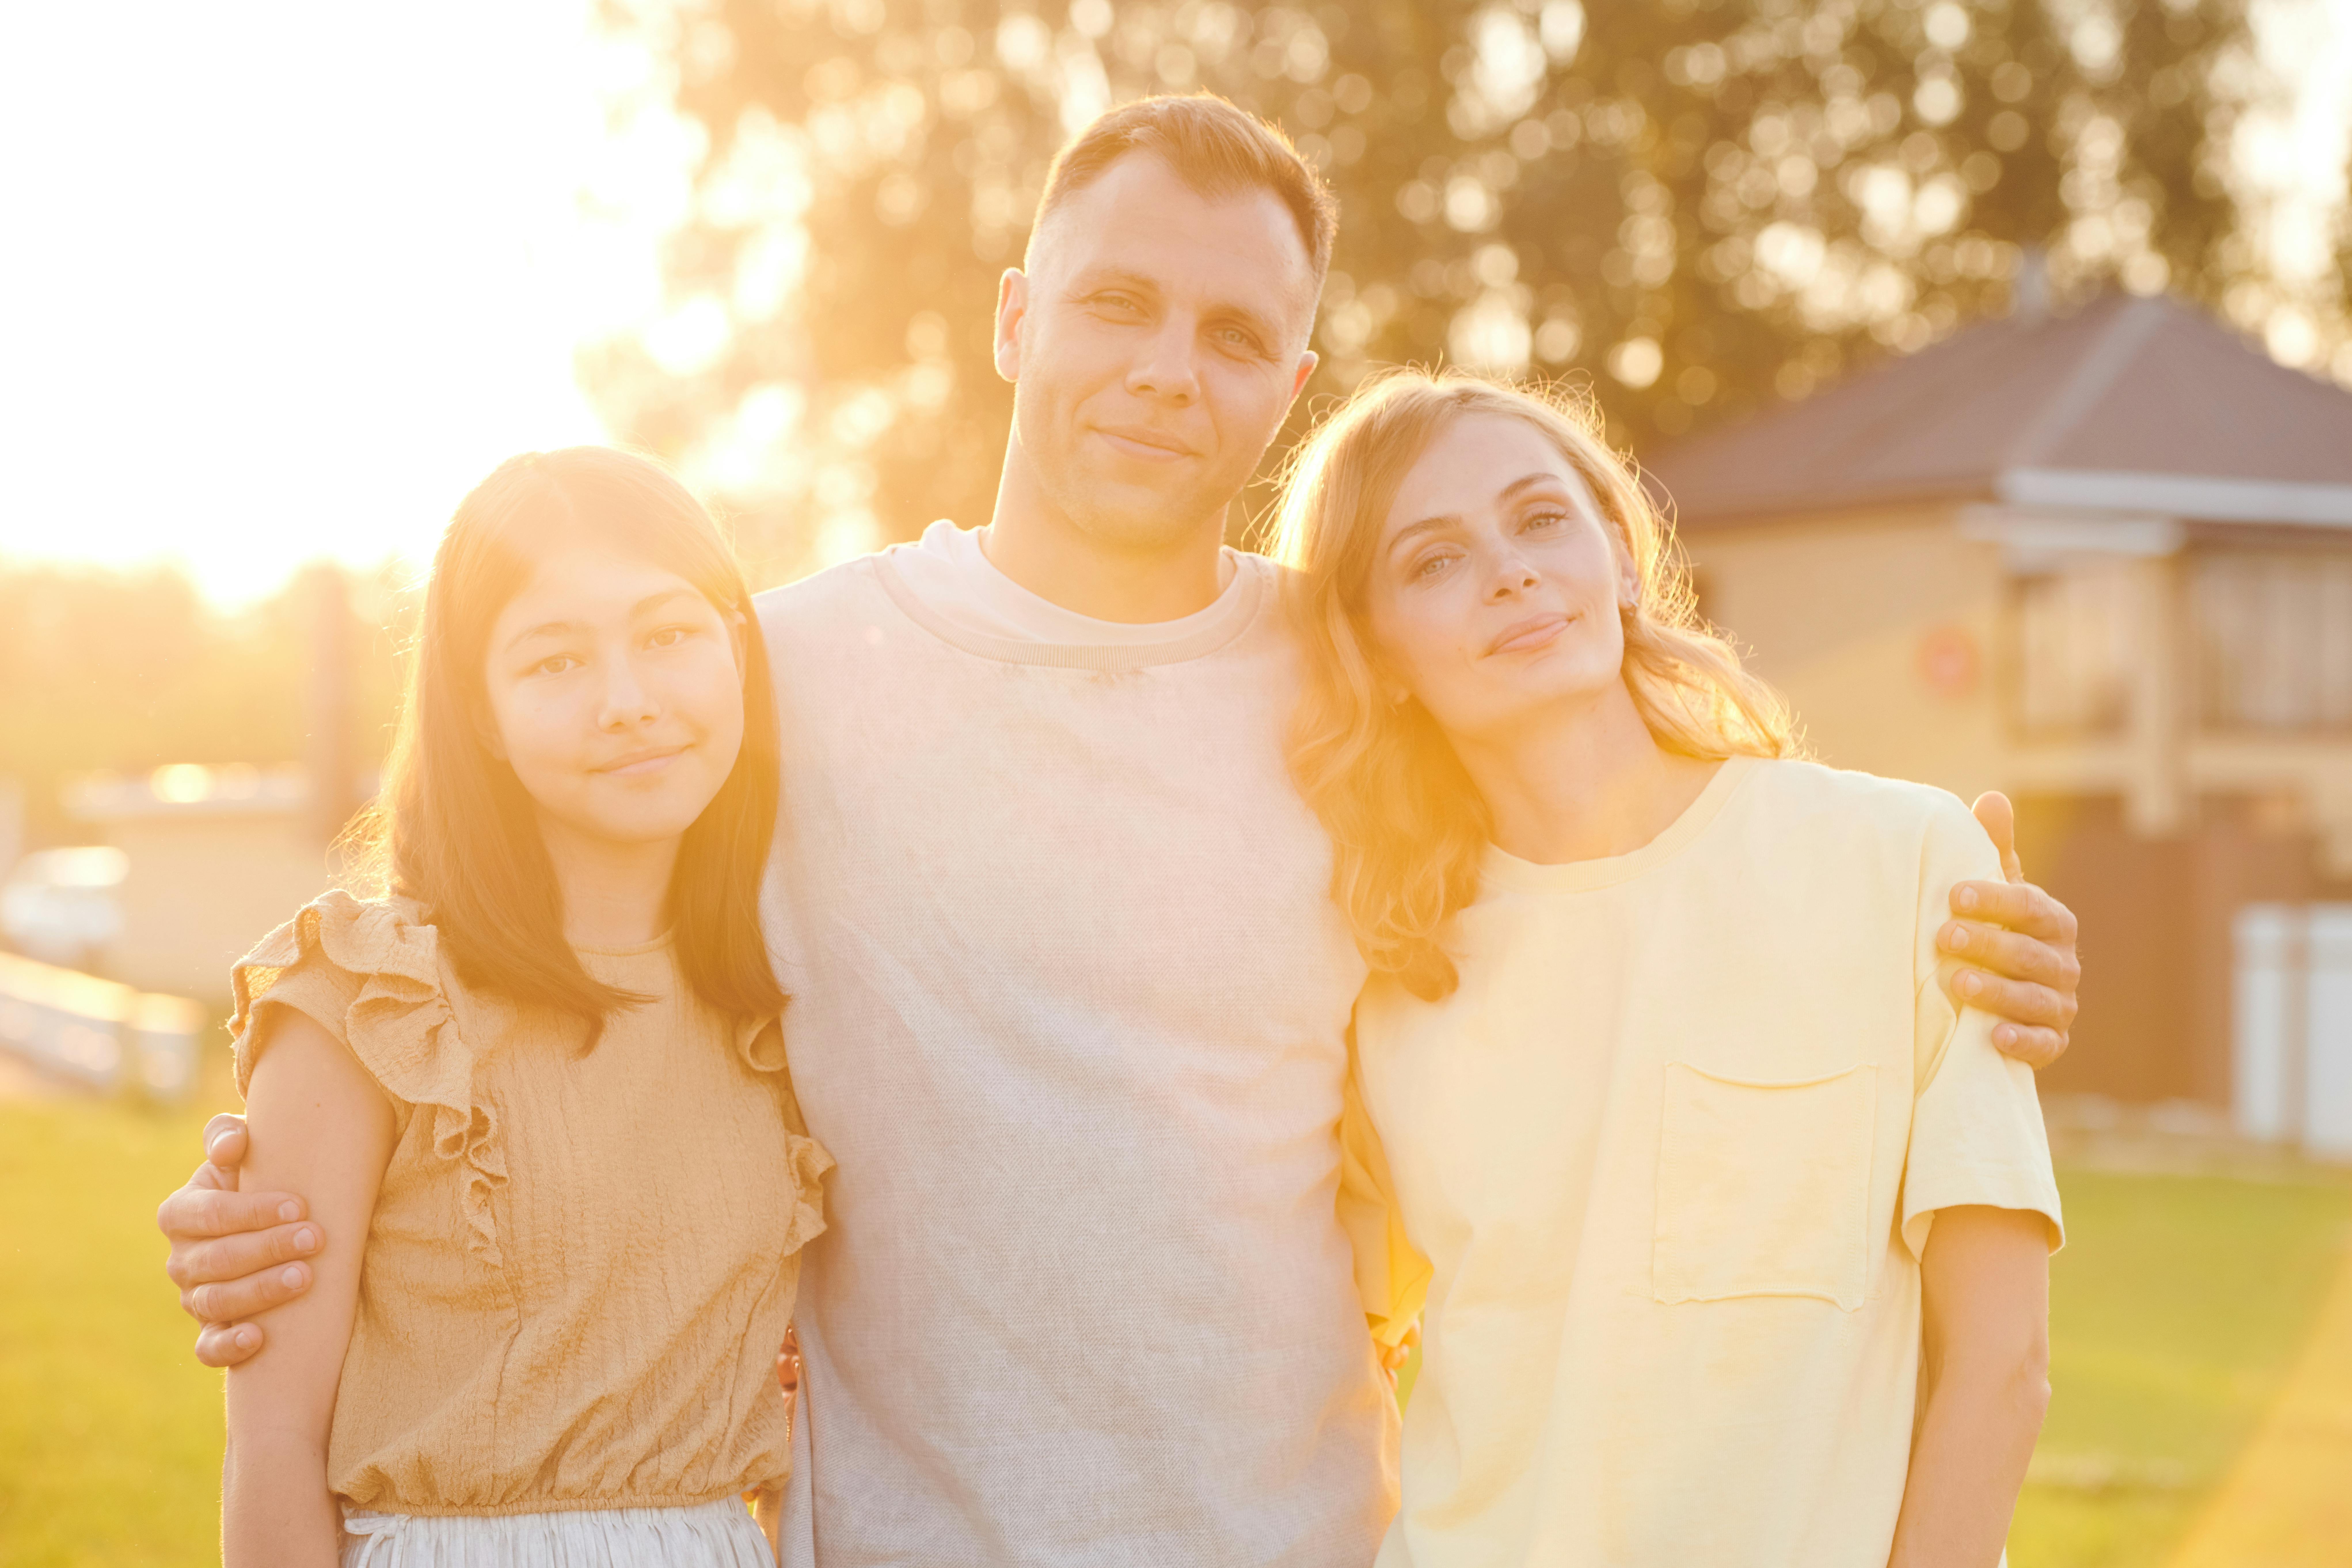 A man, a woman, and a young girl posing together | Source: Pexels